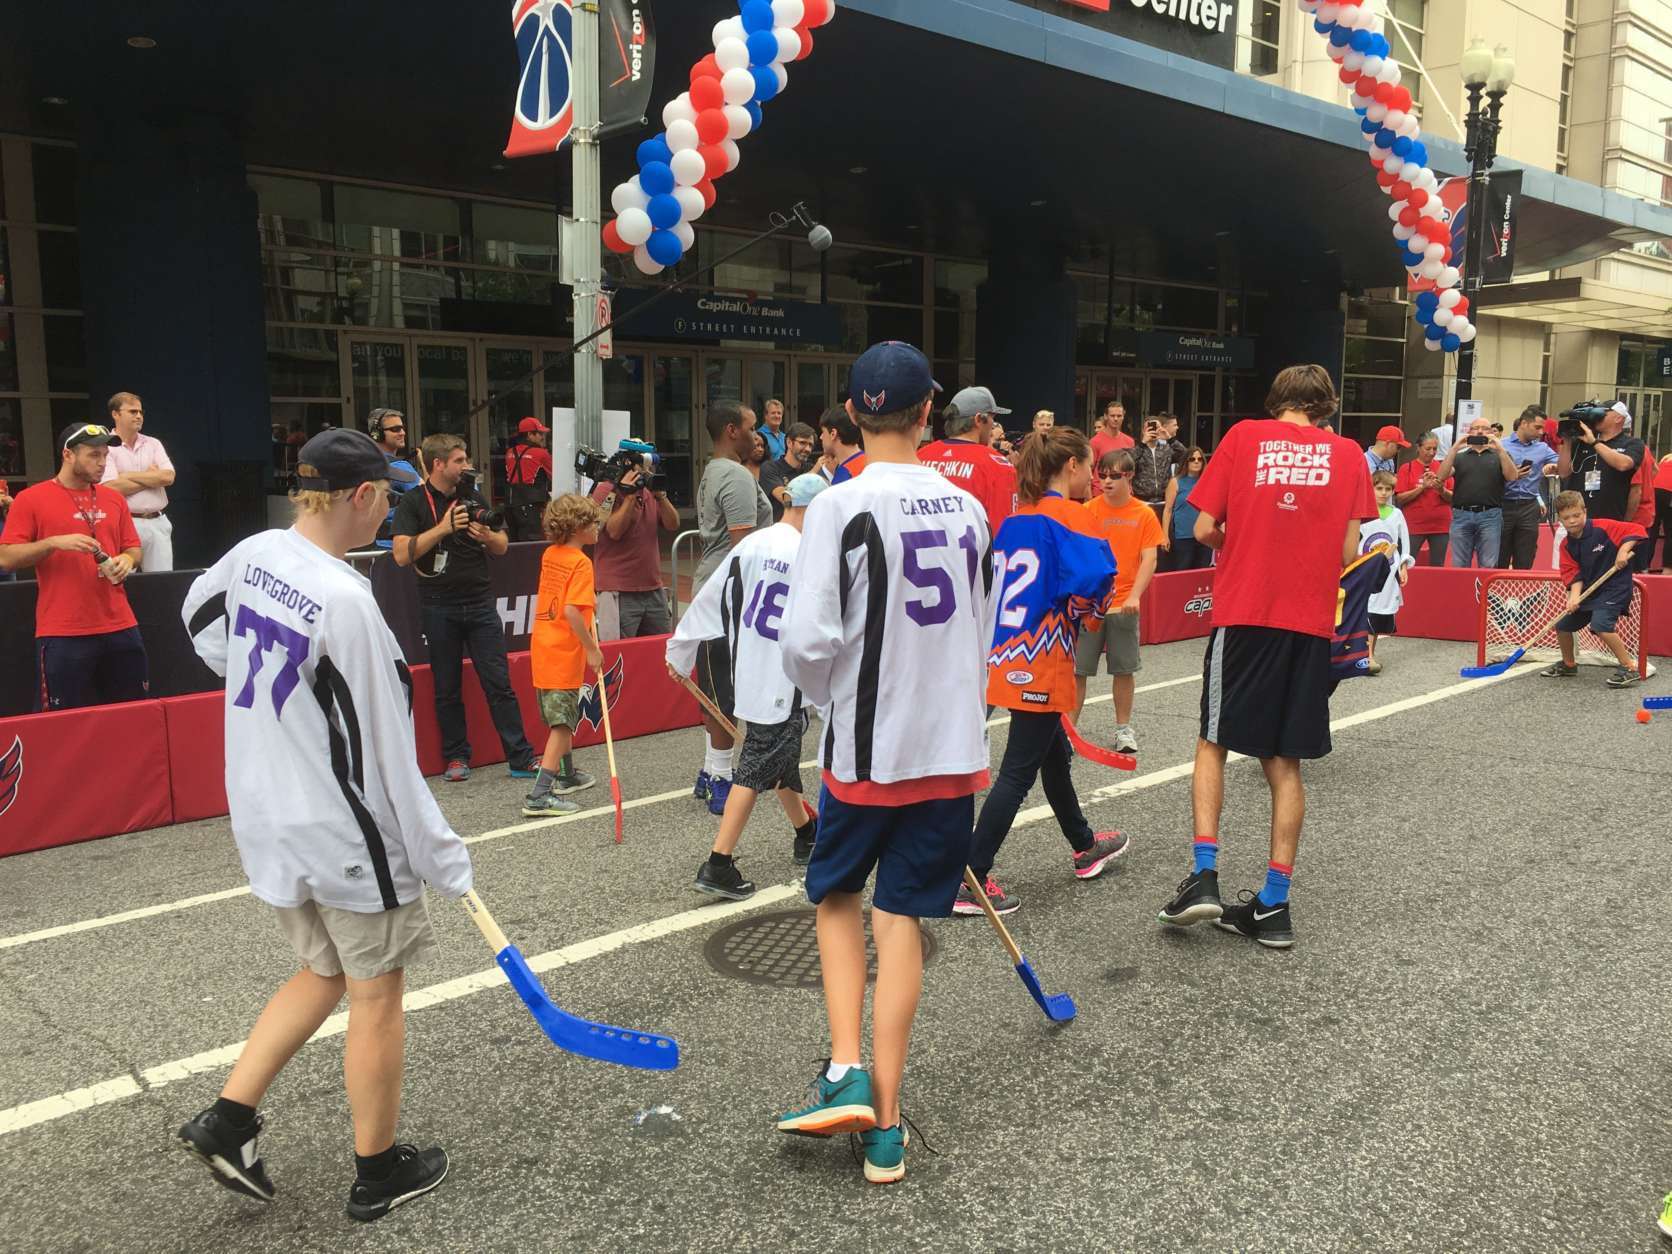 Players from the American Special Hockey Association play street hockey in front of the Capital One Arena Friday before a visit from the Caps' Alex Ovechkin. (WTOP/Mike Murillo)